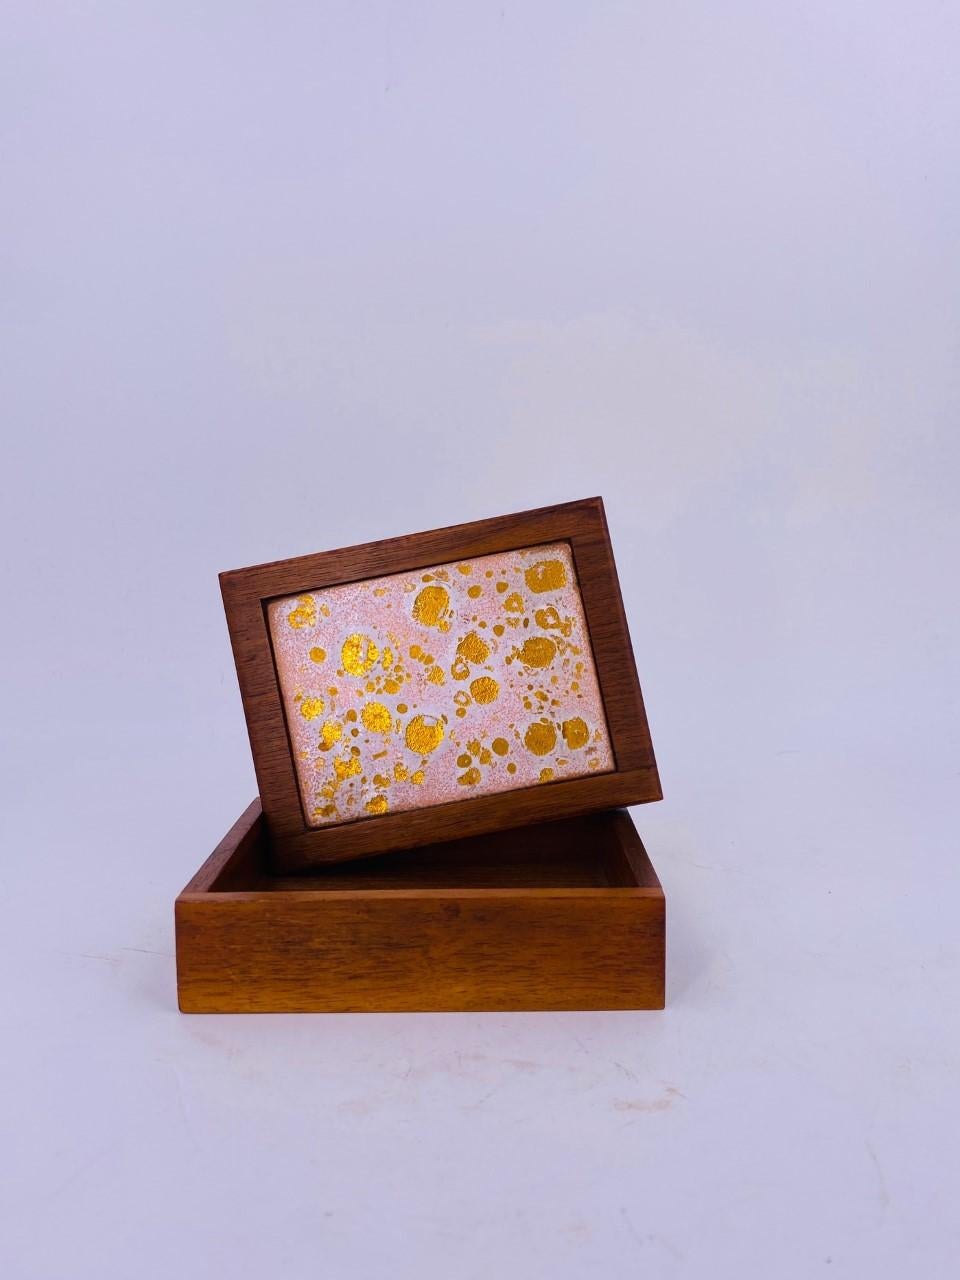 Beautiful and unique midcentury walnut box with ceramic inlay top. This beautiful box can be used for jewelry or any type of cherised small items or just by itself is a beautiful piece. Solid walnut pieces with a ceramic inlay in beautiful gold